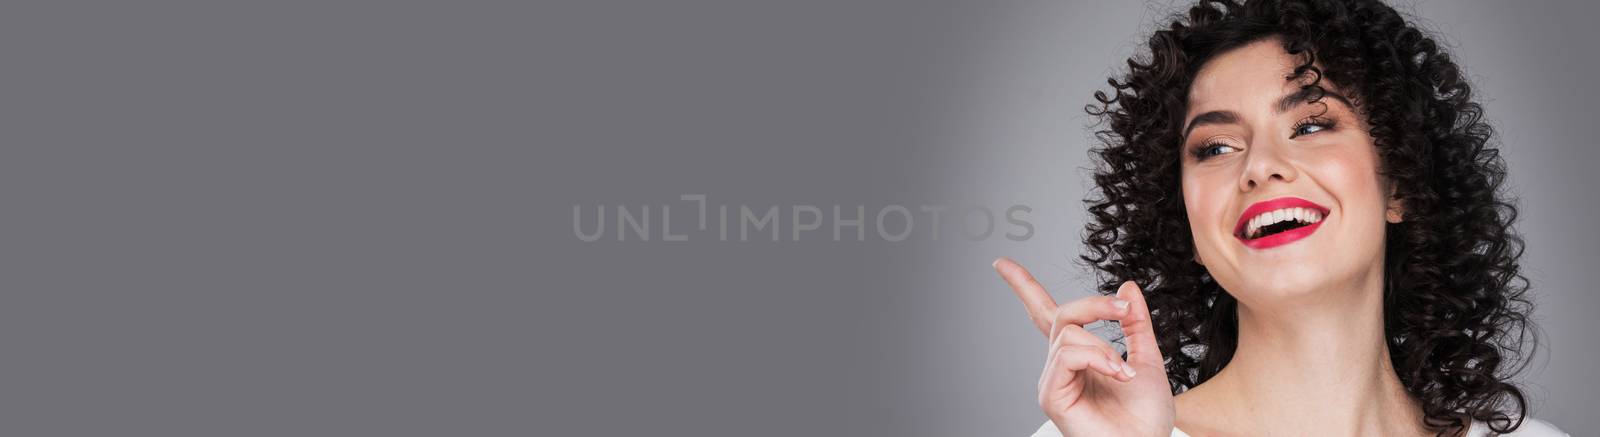 Woman showing product .Beautiful girl with curly hair pointing to the side . Presenting product. Gray background with copy space